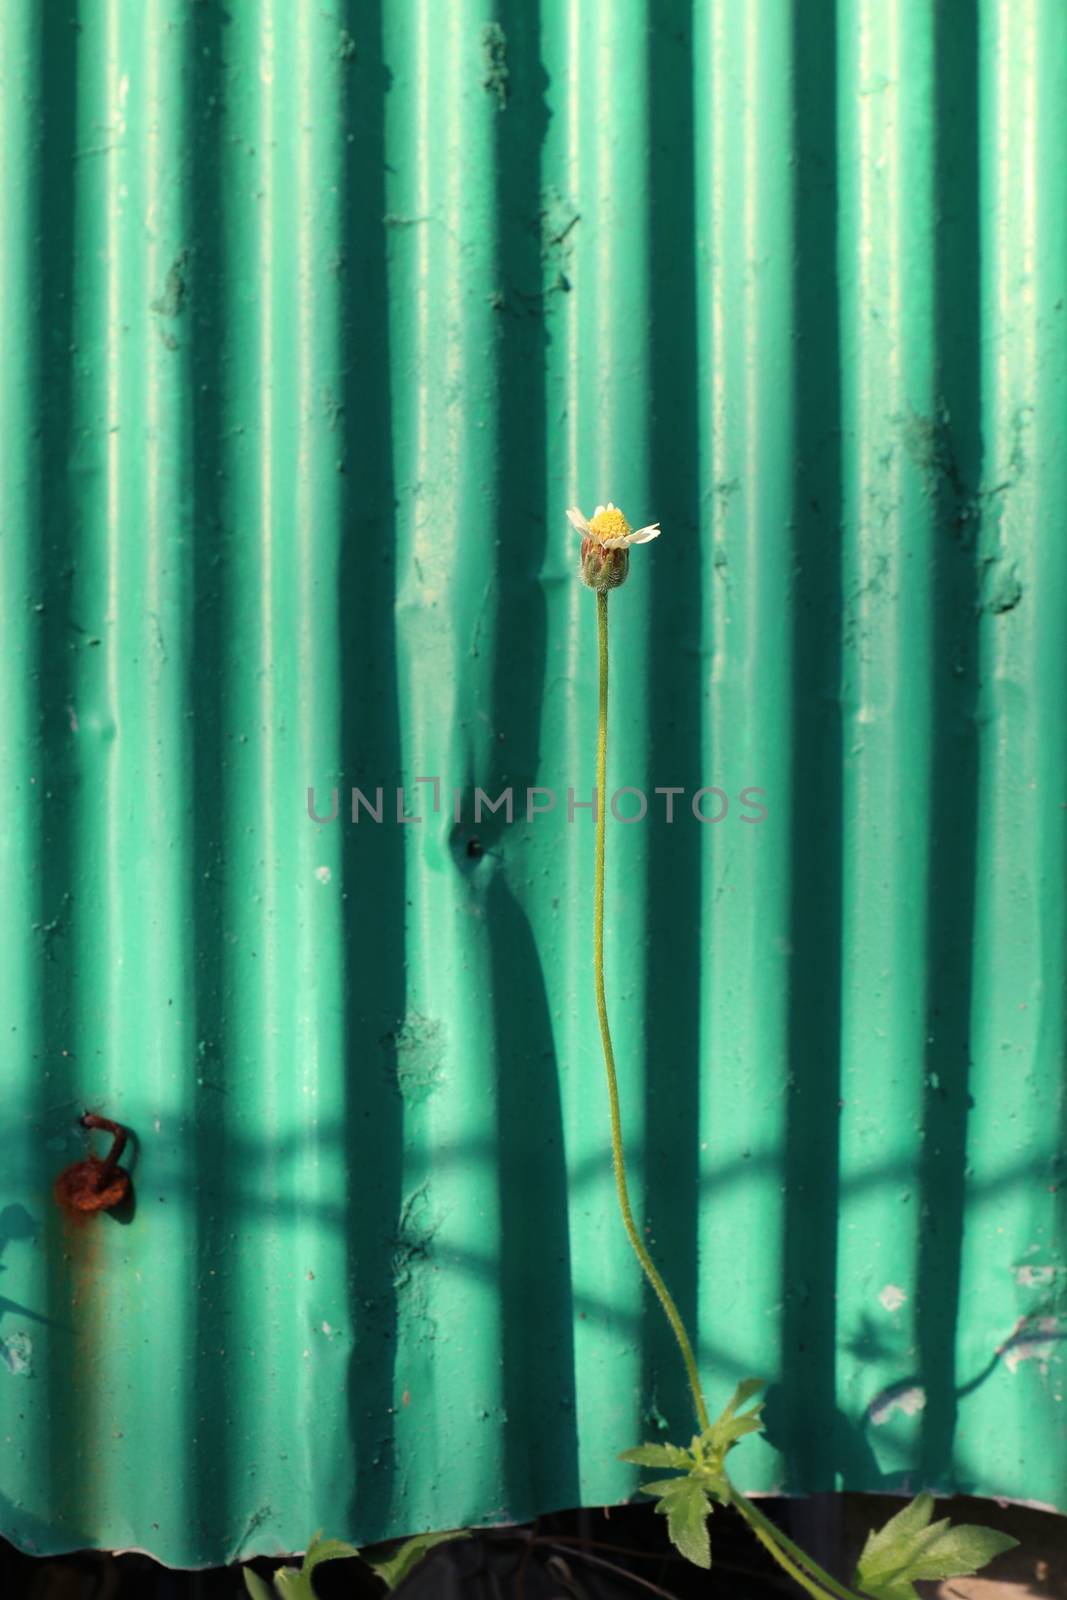 Grass, small flowers beside the fence, galvanized sheet, Small flowers on green galvanized sheet old background morning for design